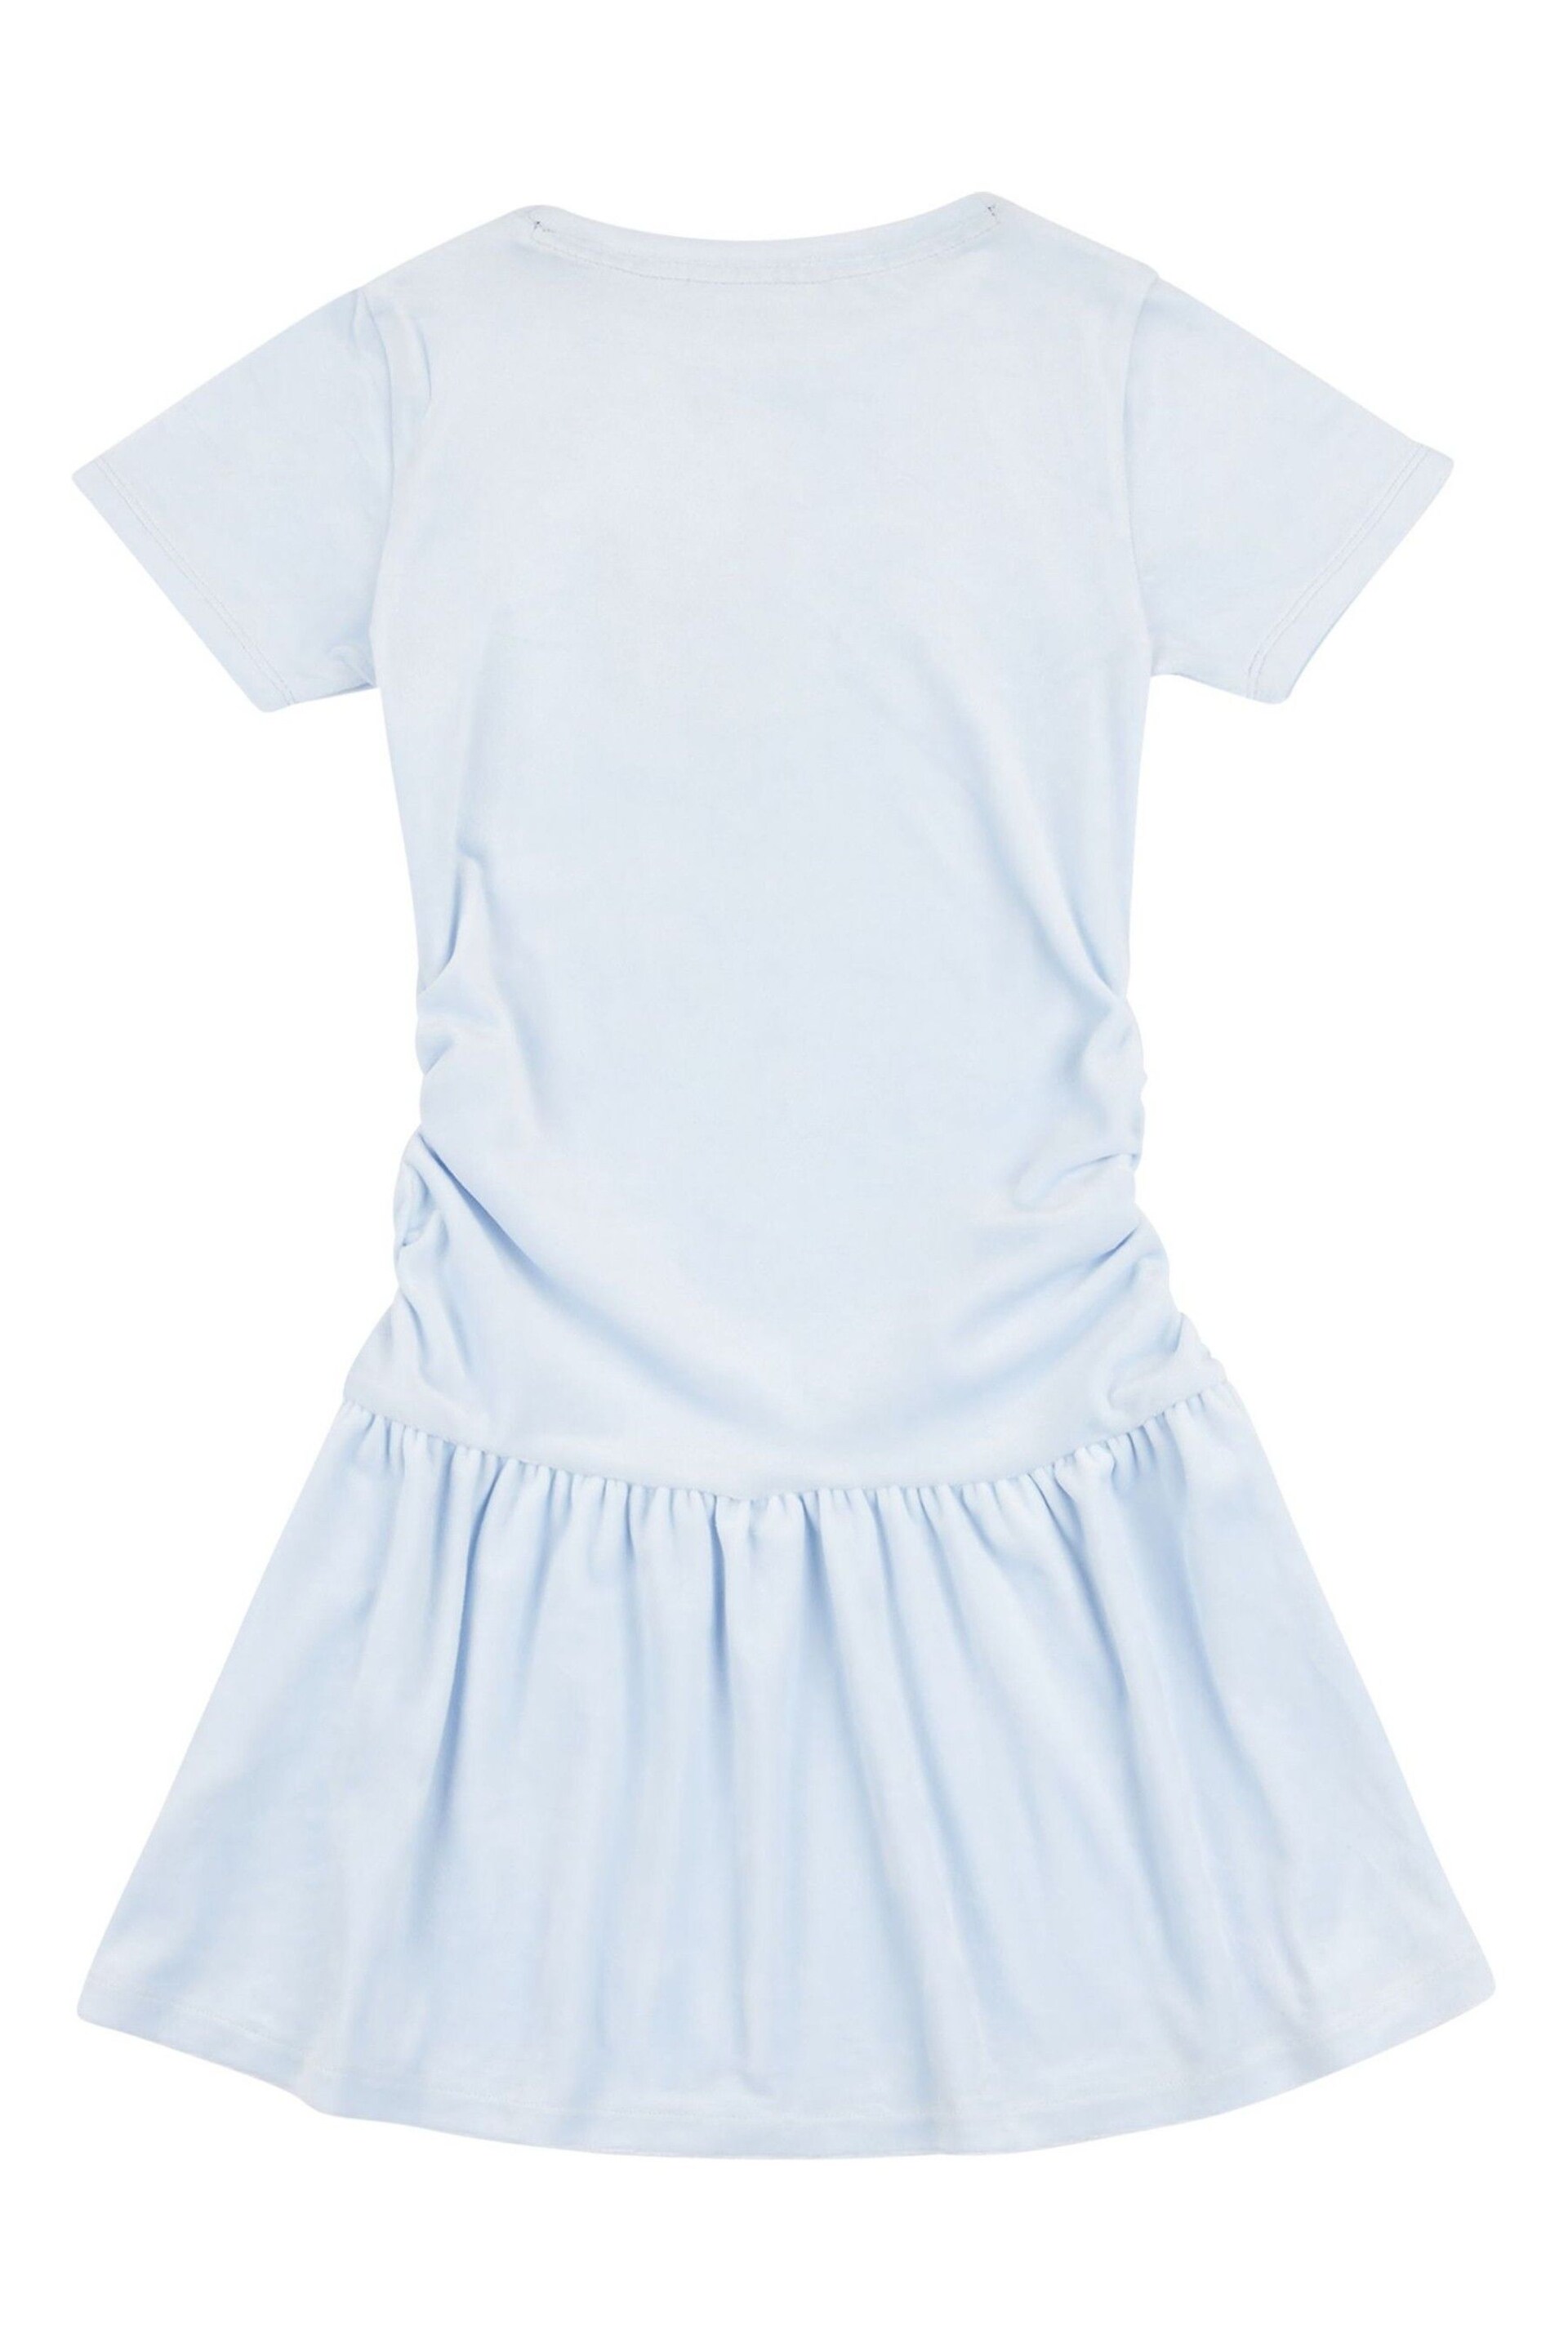 Juicy Couture Girls Blue Diamante Crown Dress - Image 6 of 7